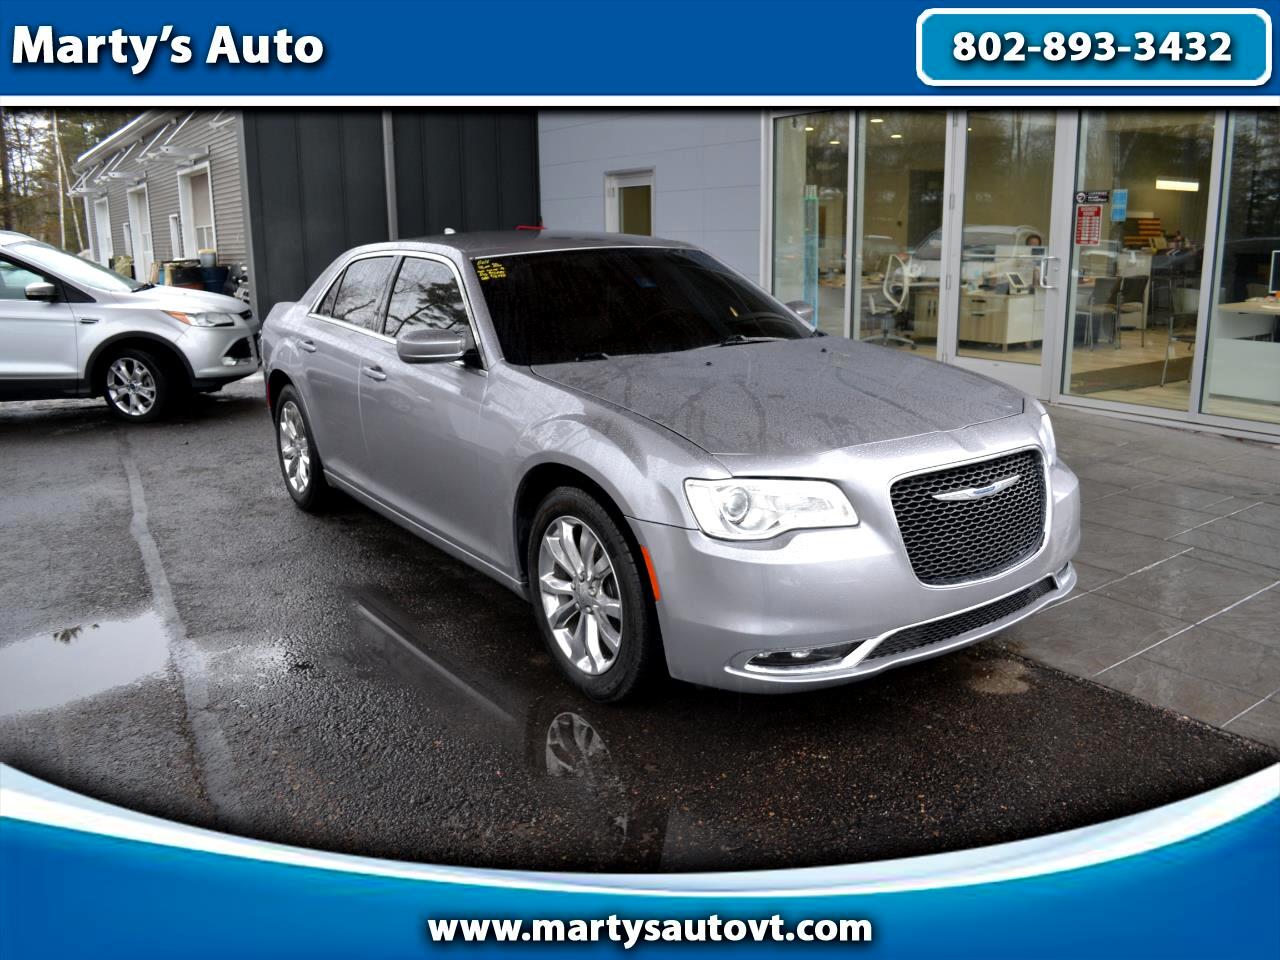 Used 2016 Chrysler 300 4dr Sdn Limited AWD for Sale in Milton VT 05468 ...